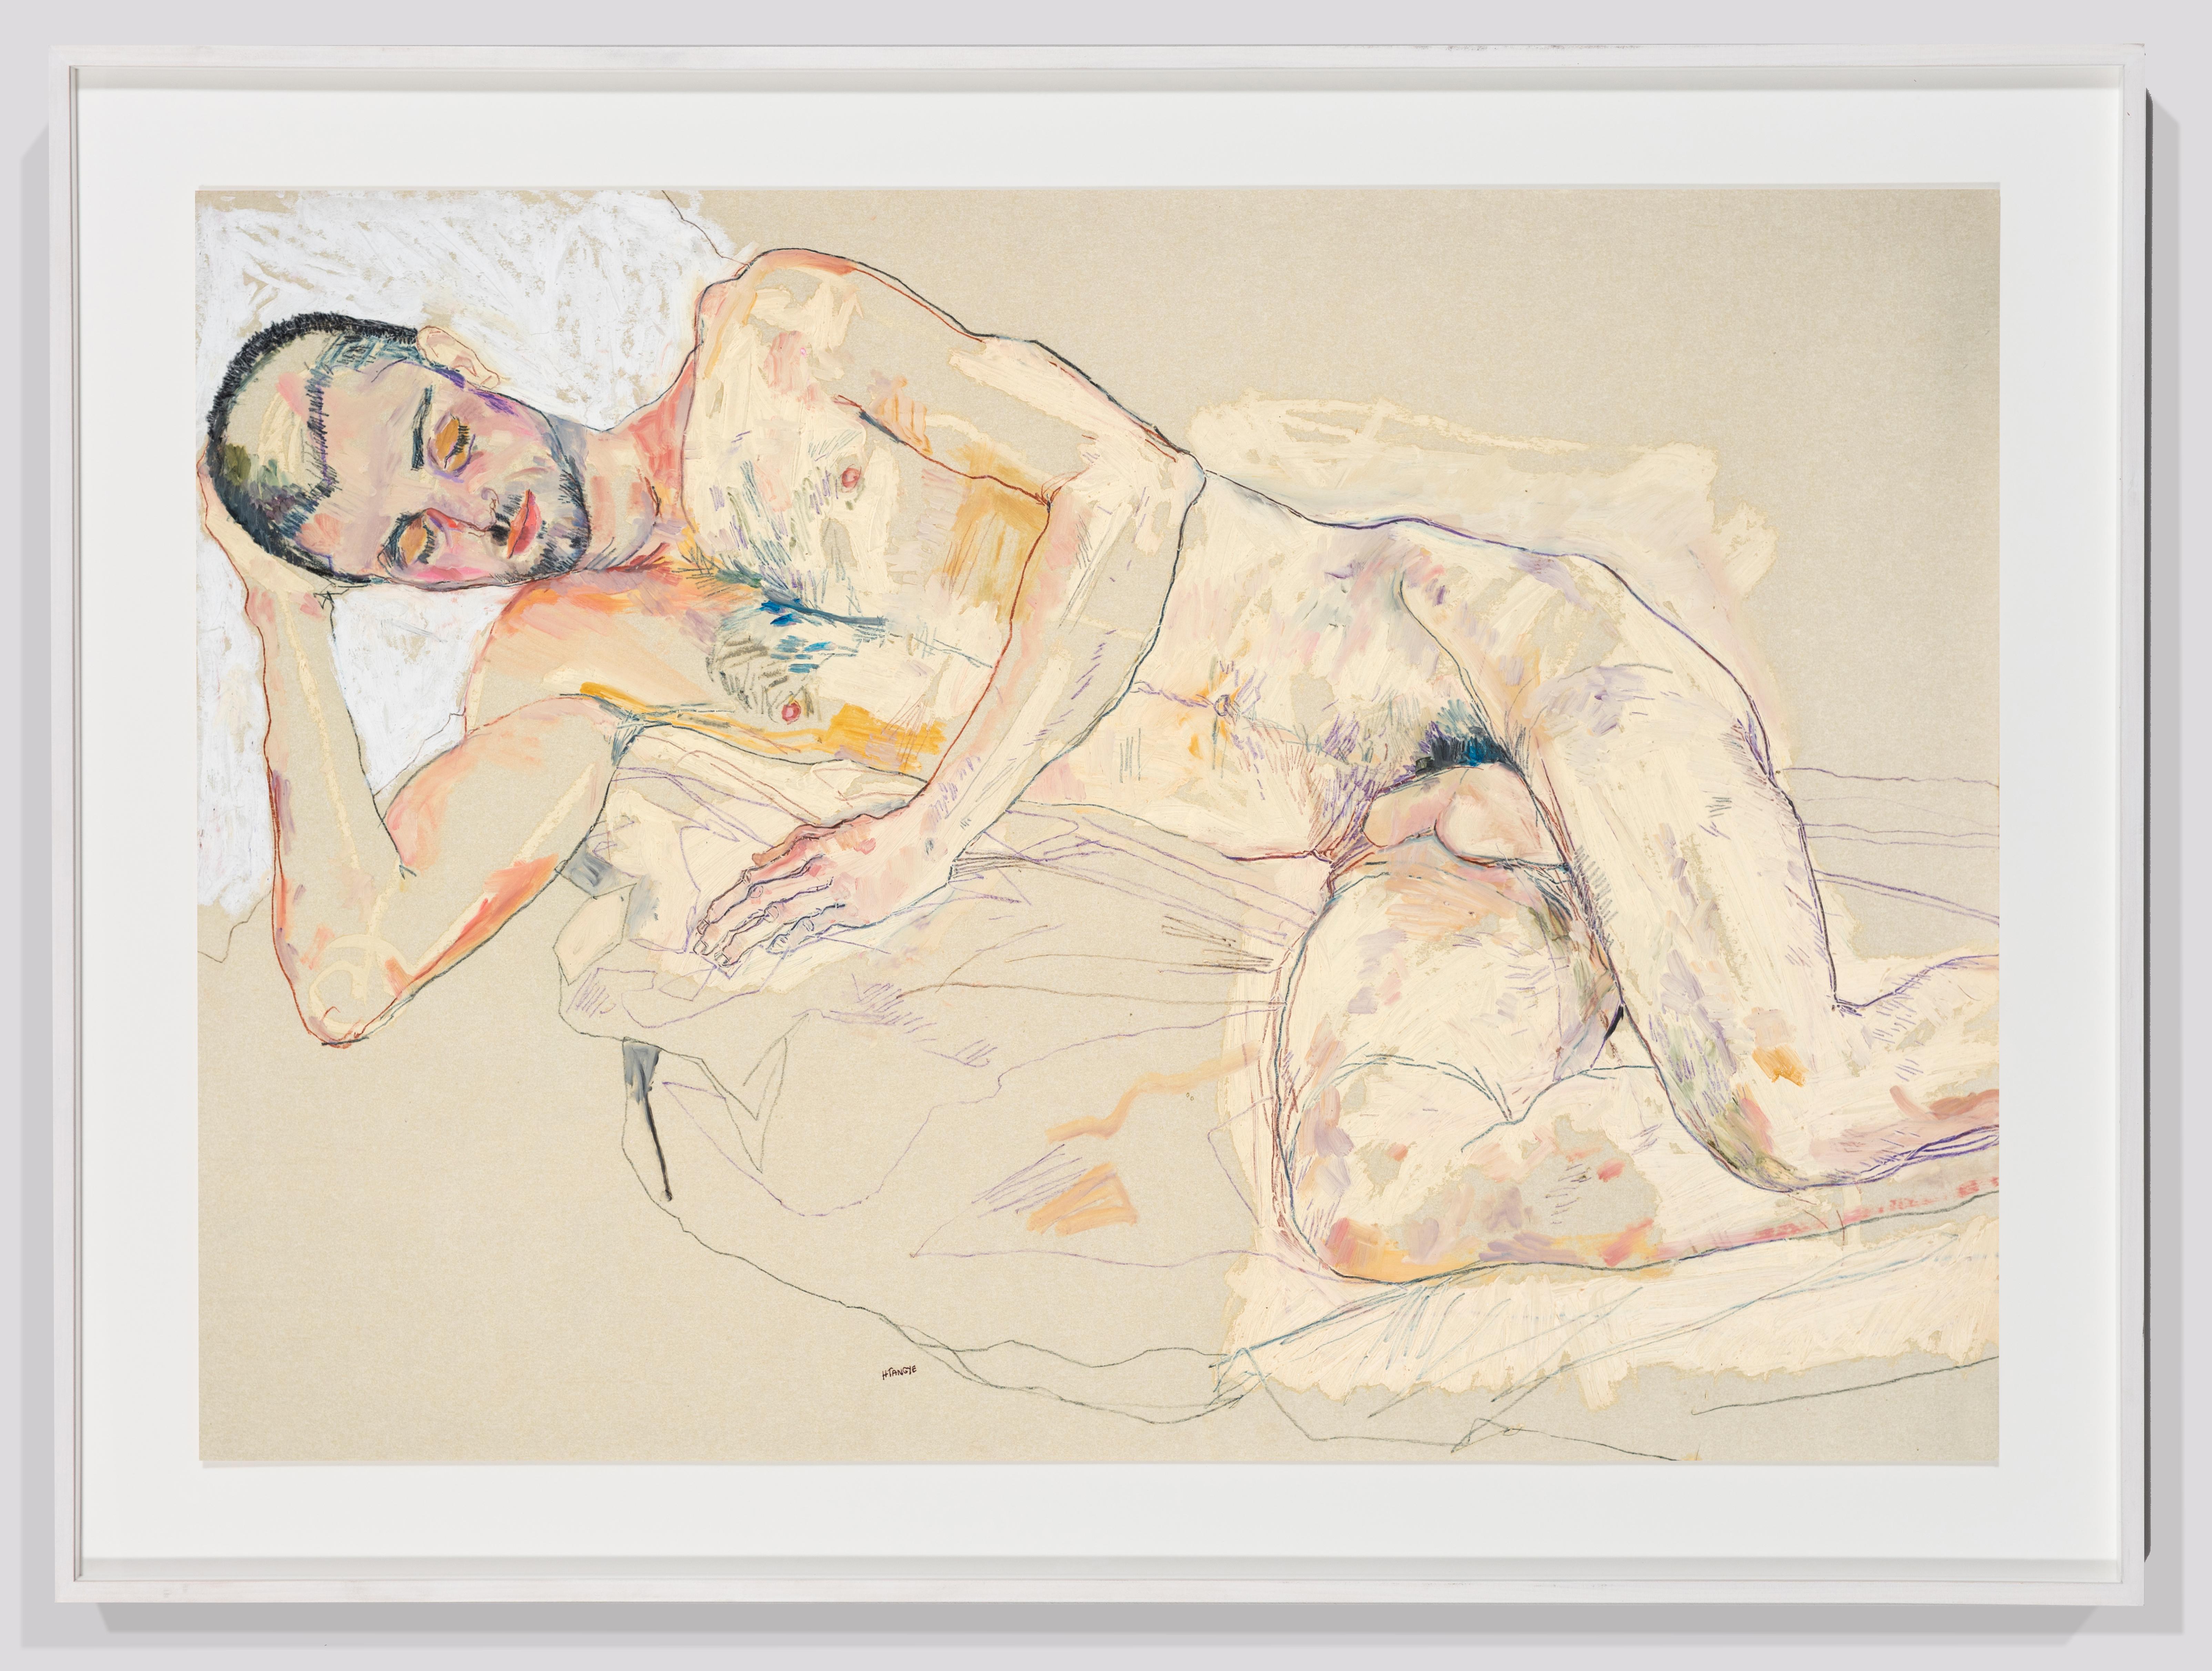 Craig (Nude), Mixed media on Pergamenata parchment - Painting by Howard Tangye